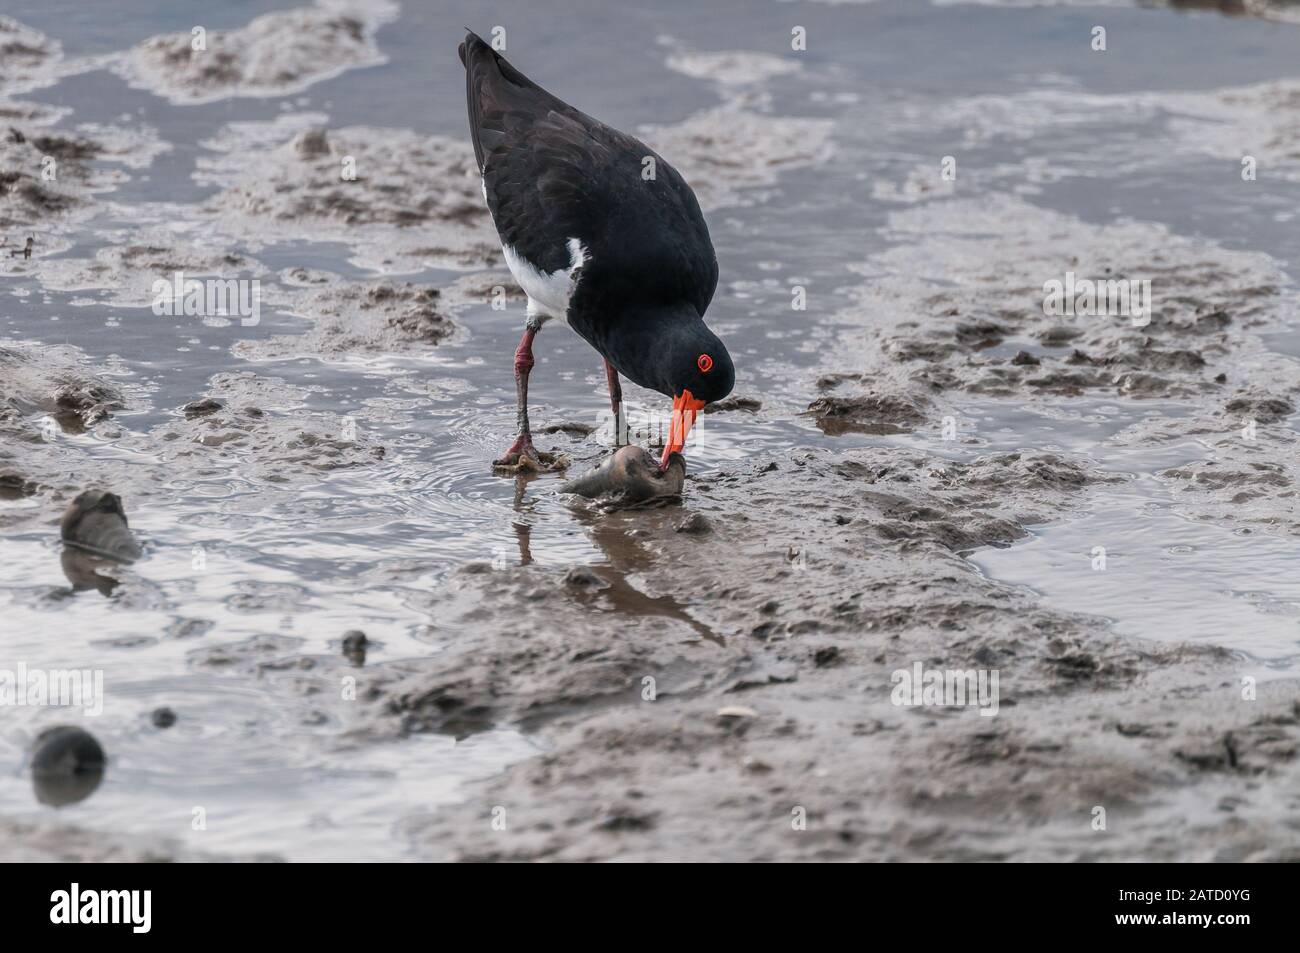 An energetic oyster-catcher probes a marooned, mudflat shell searching for a meal on the mudflats in Cairns, Queensland. Stock Photo